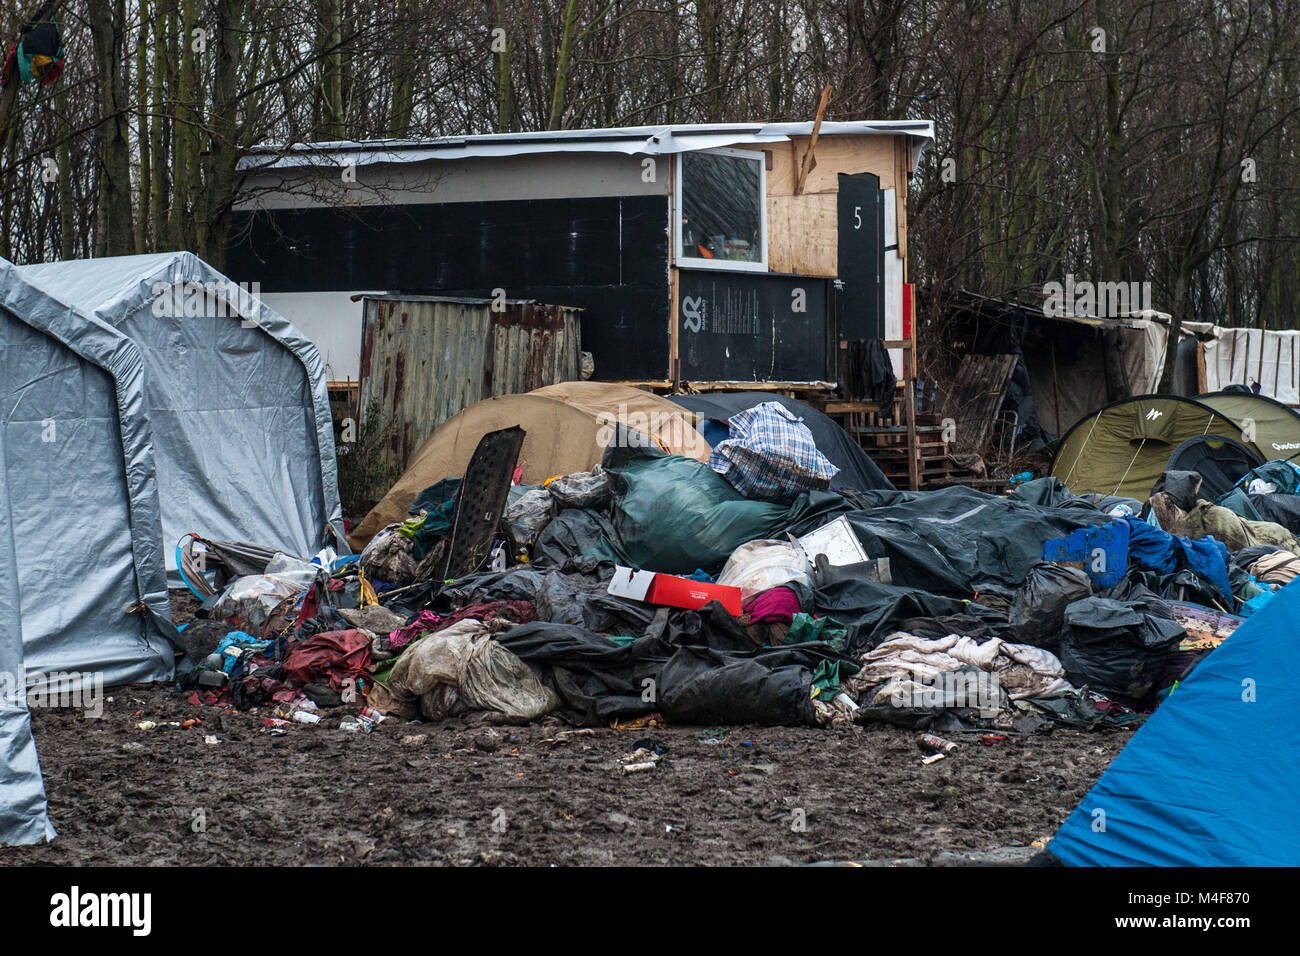 Grande-Synthe, Northern France. 31 January 2016. A General view of the Grande-Synthe refugee camp close to the port of Dunkirk in Northern France. In the camp conditions are grim in part due to thick mud and a lack of basic amenities. Families live in rain soaked tents and huddle around small fires for basic heat. Stock Photo